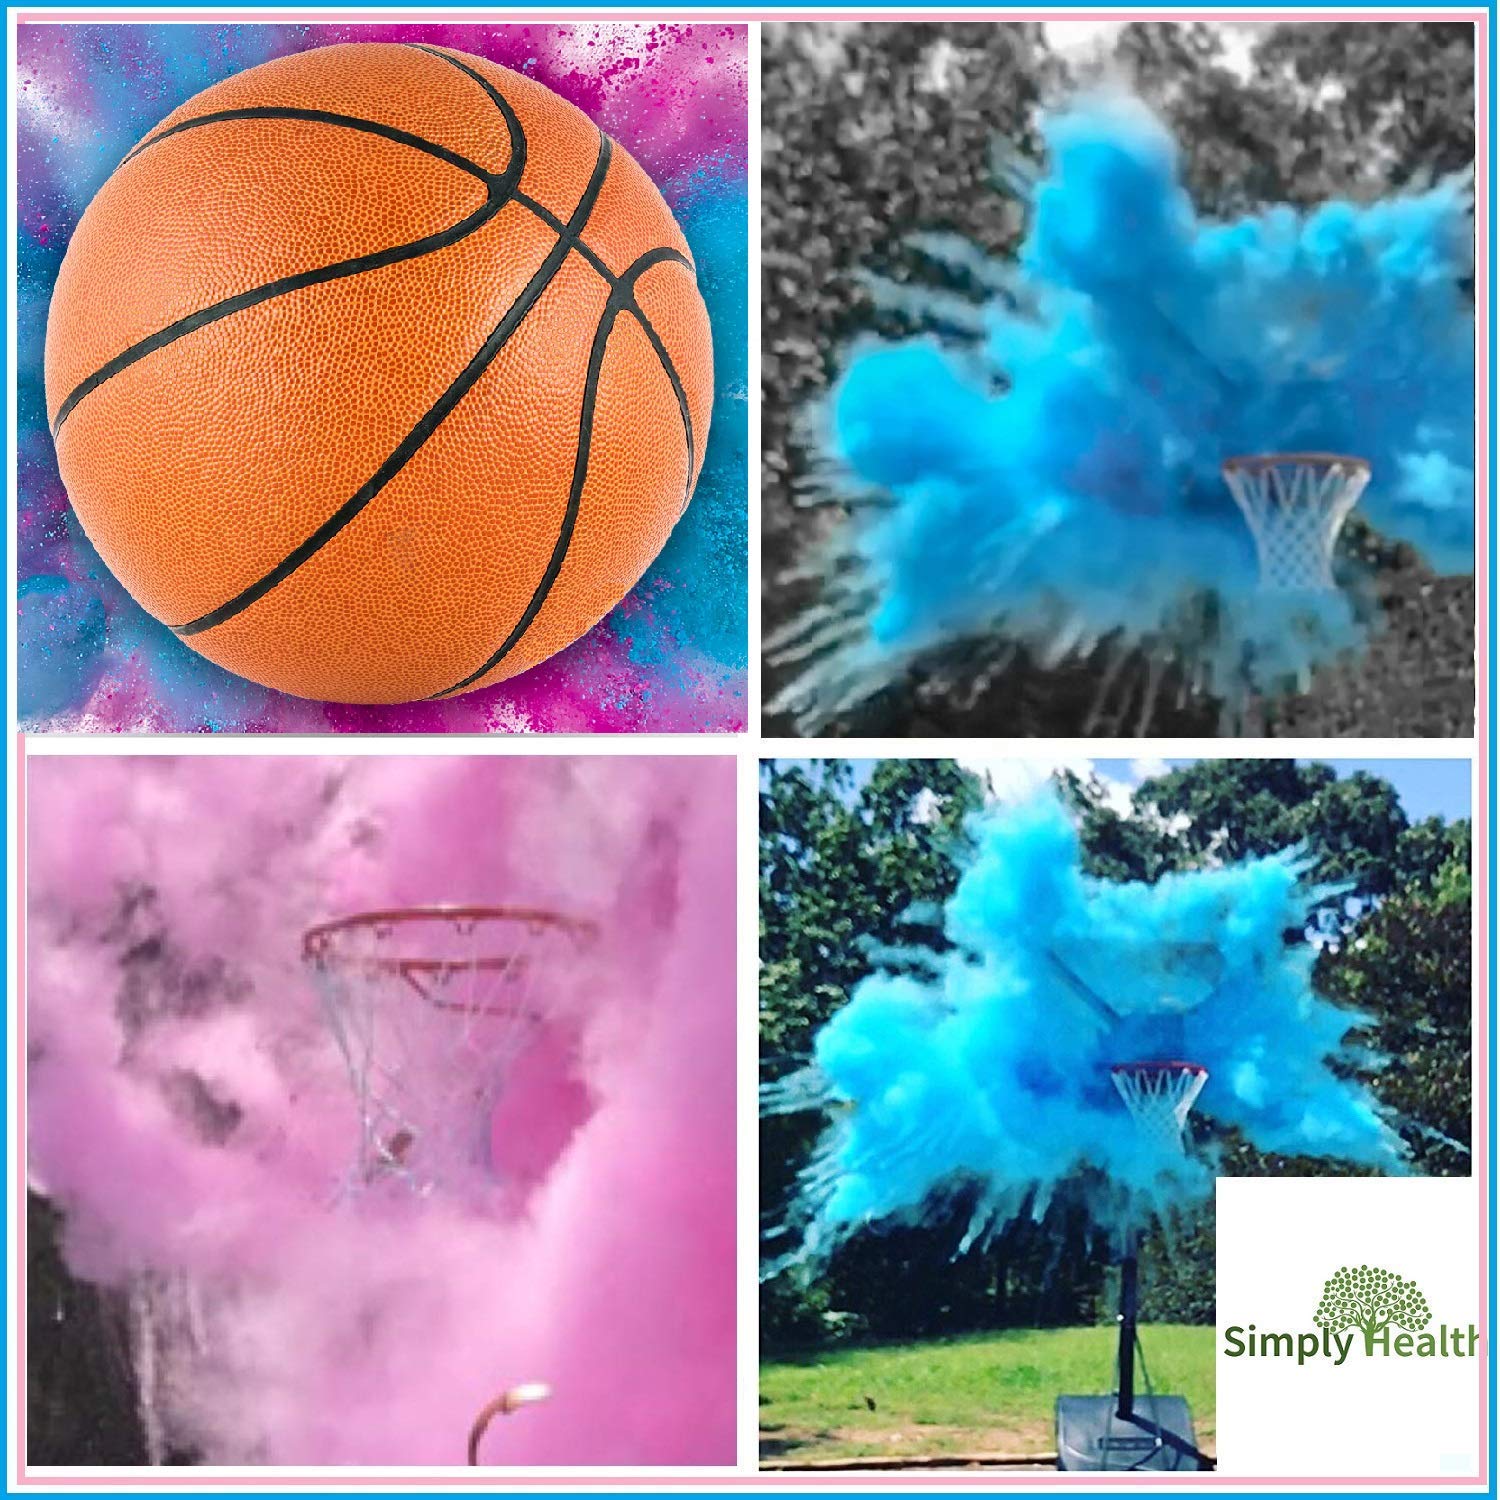 EBD Products Gender Reveal Basketball, Pink And Blue Powder Kit For Baby Boy Girl Gender Reveal Party. Biggest Basketball Most Powder?